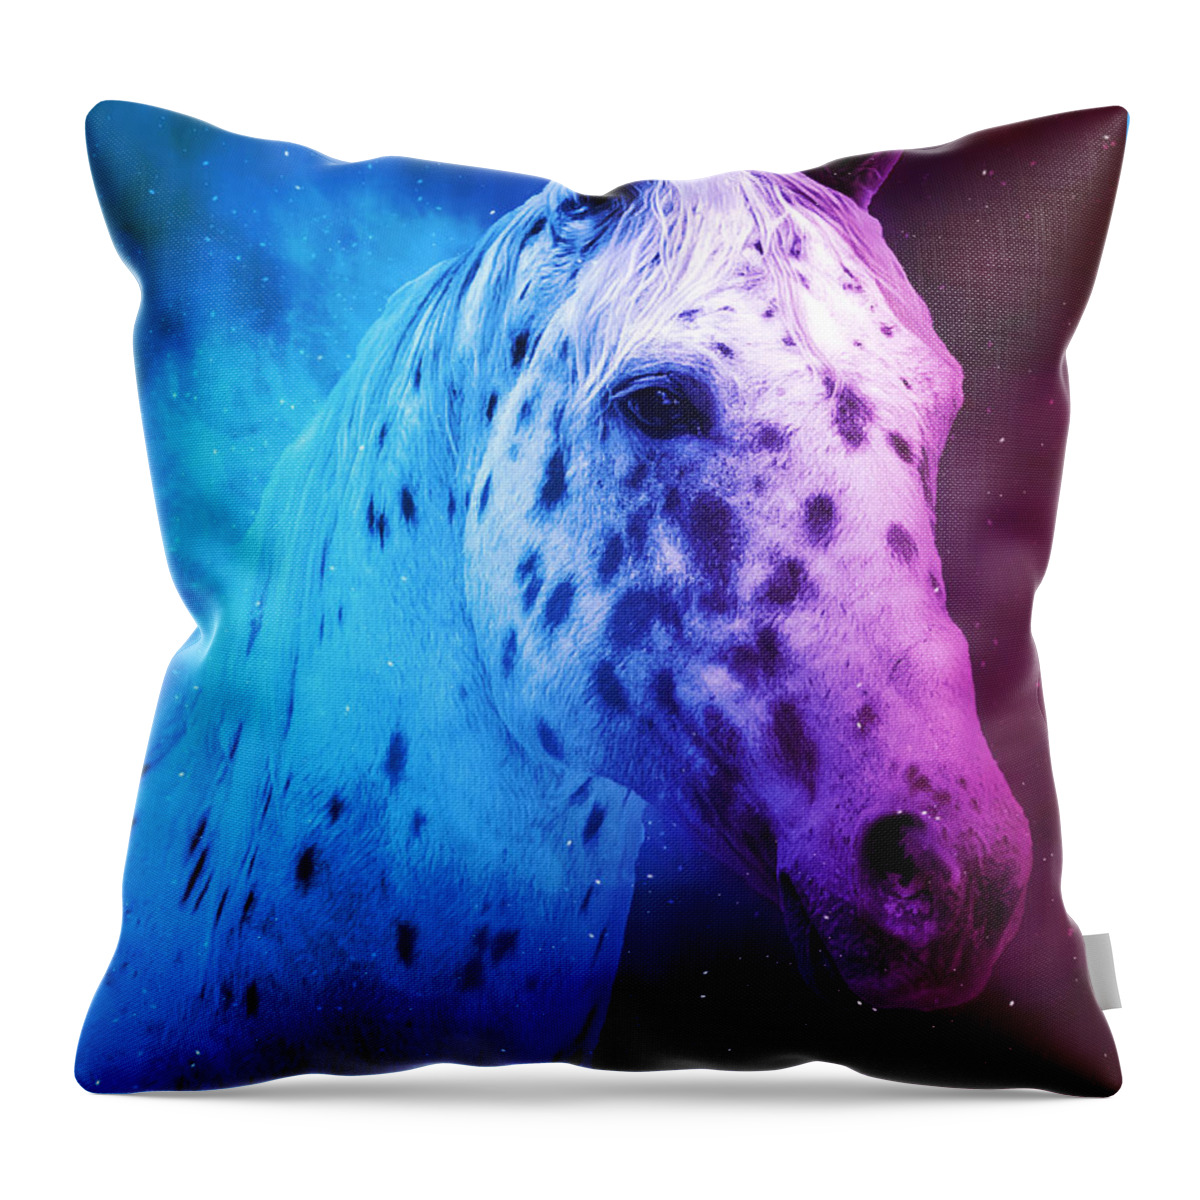 Appaloosa Throw Pillow featuring the digital art Appaloosa horse close up portrait in blue and violet by Nicko Prints